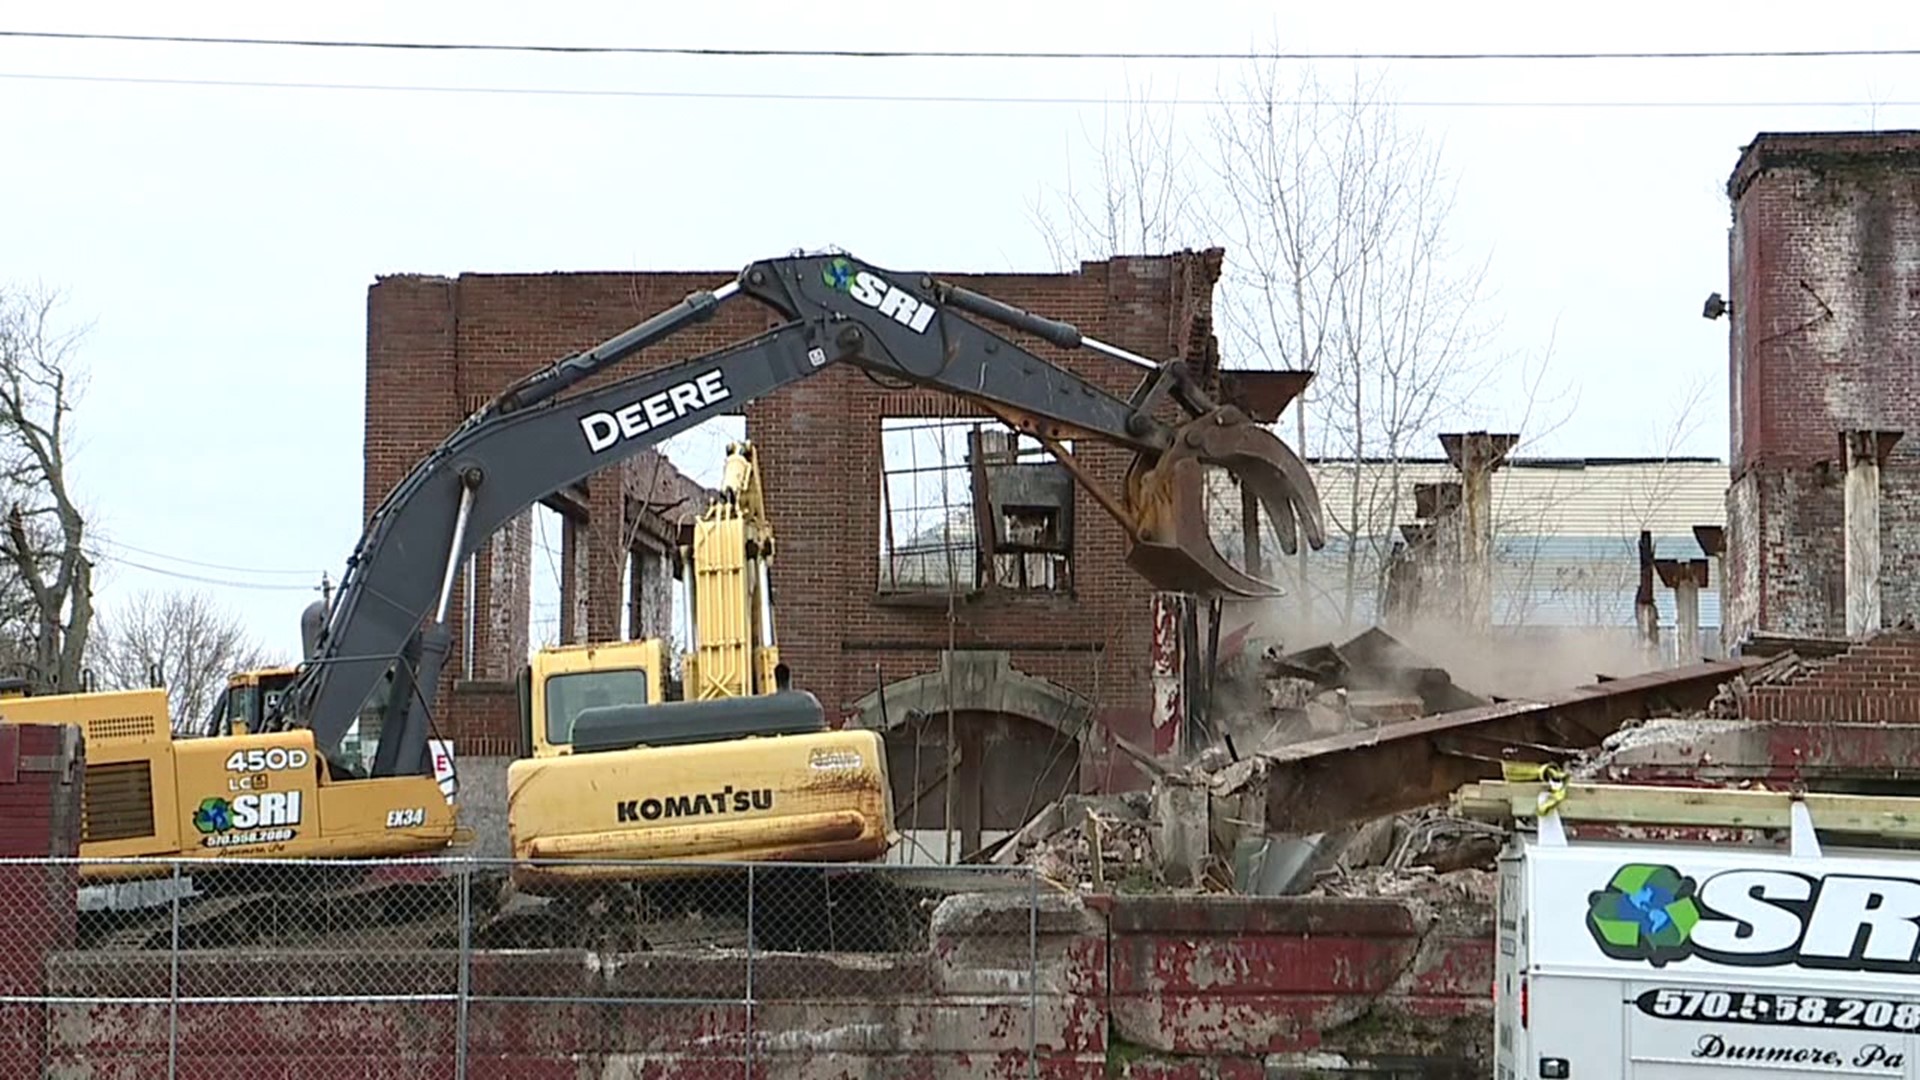 A decades-long eye-sore and public safety hazard along East Washington Street in the city is finally being torn down.